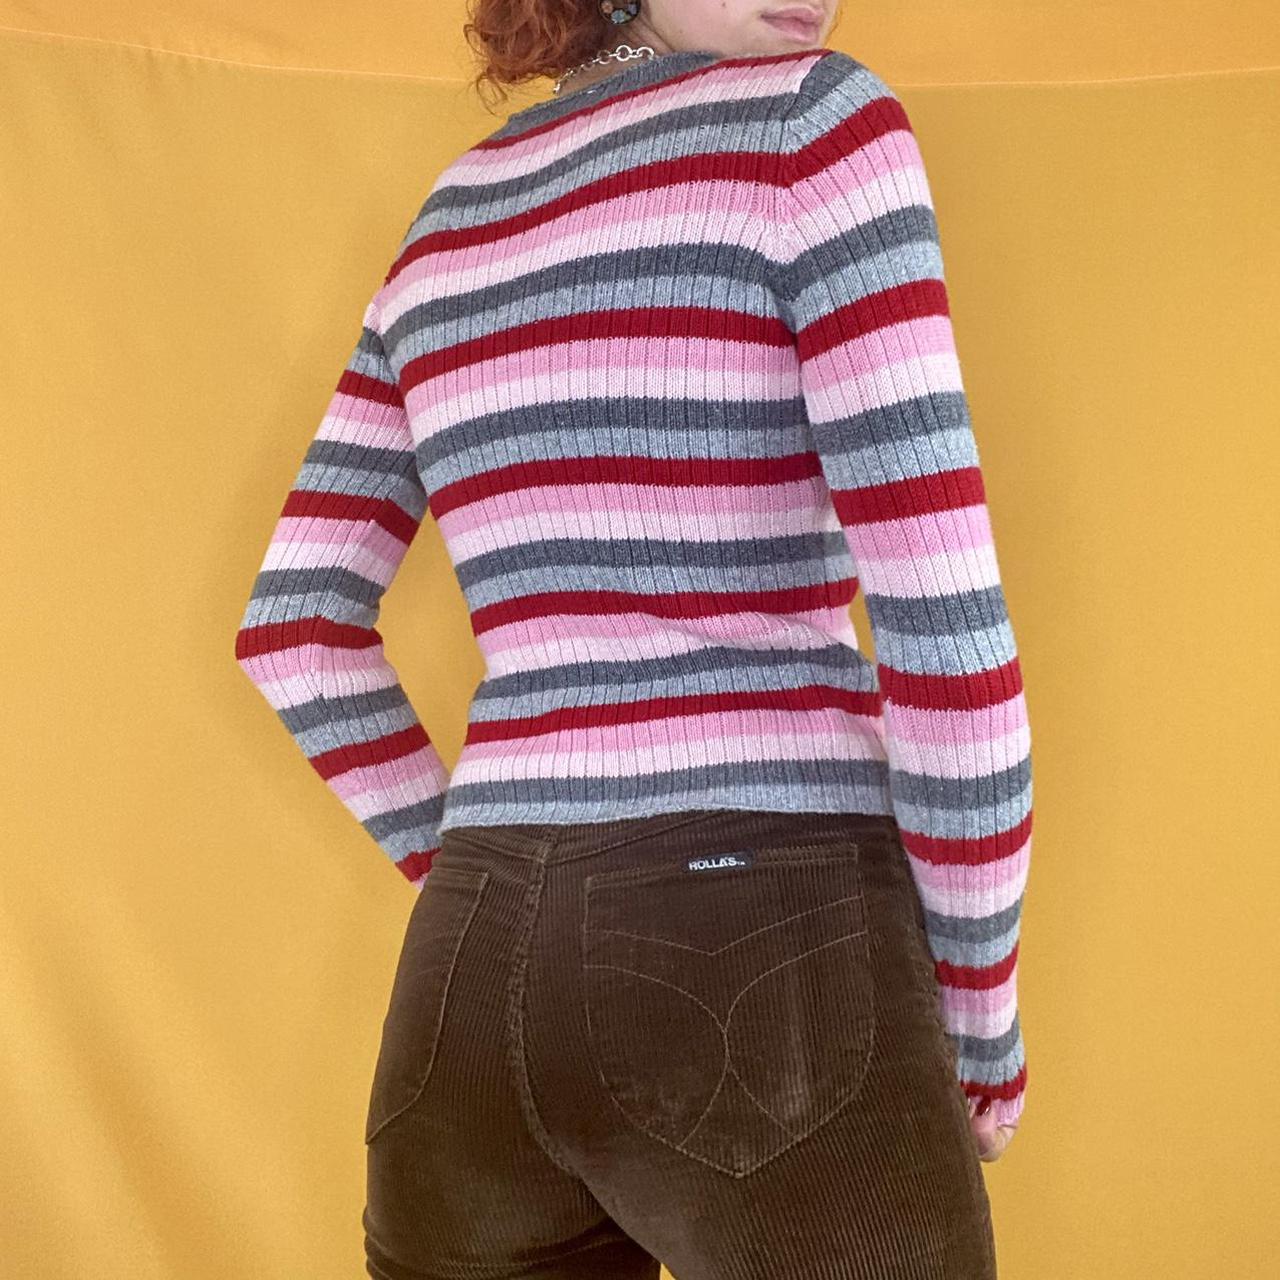 Product Image 4 - VINTAGE MUDD JEANS SWEATER!
multi colored